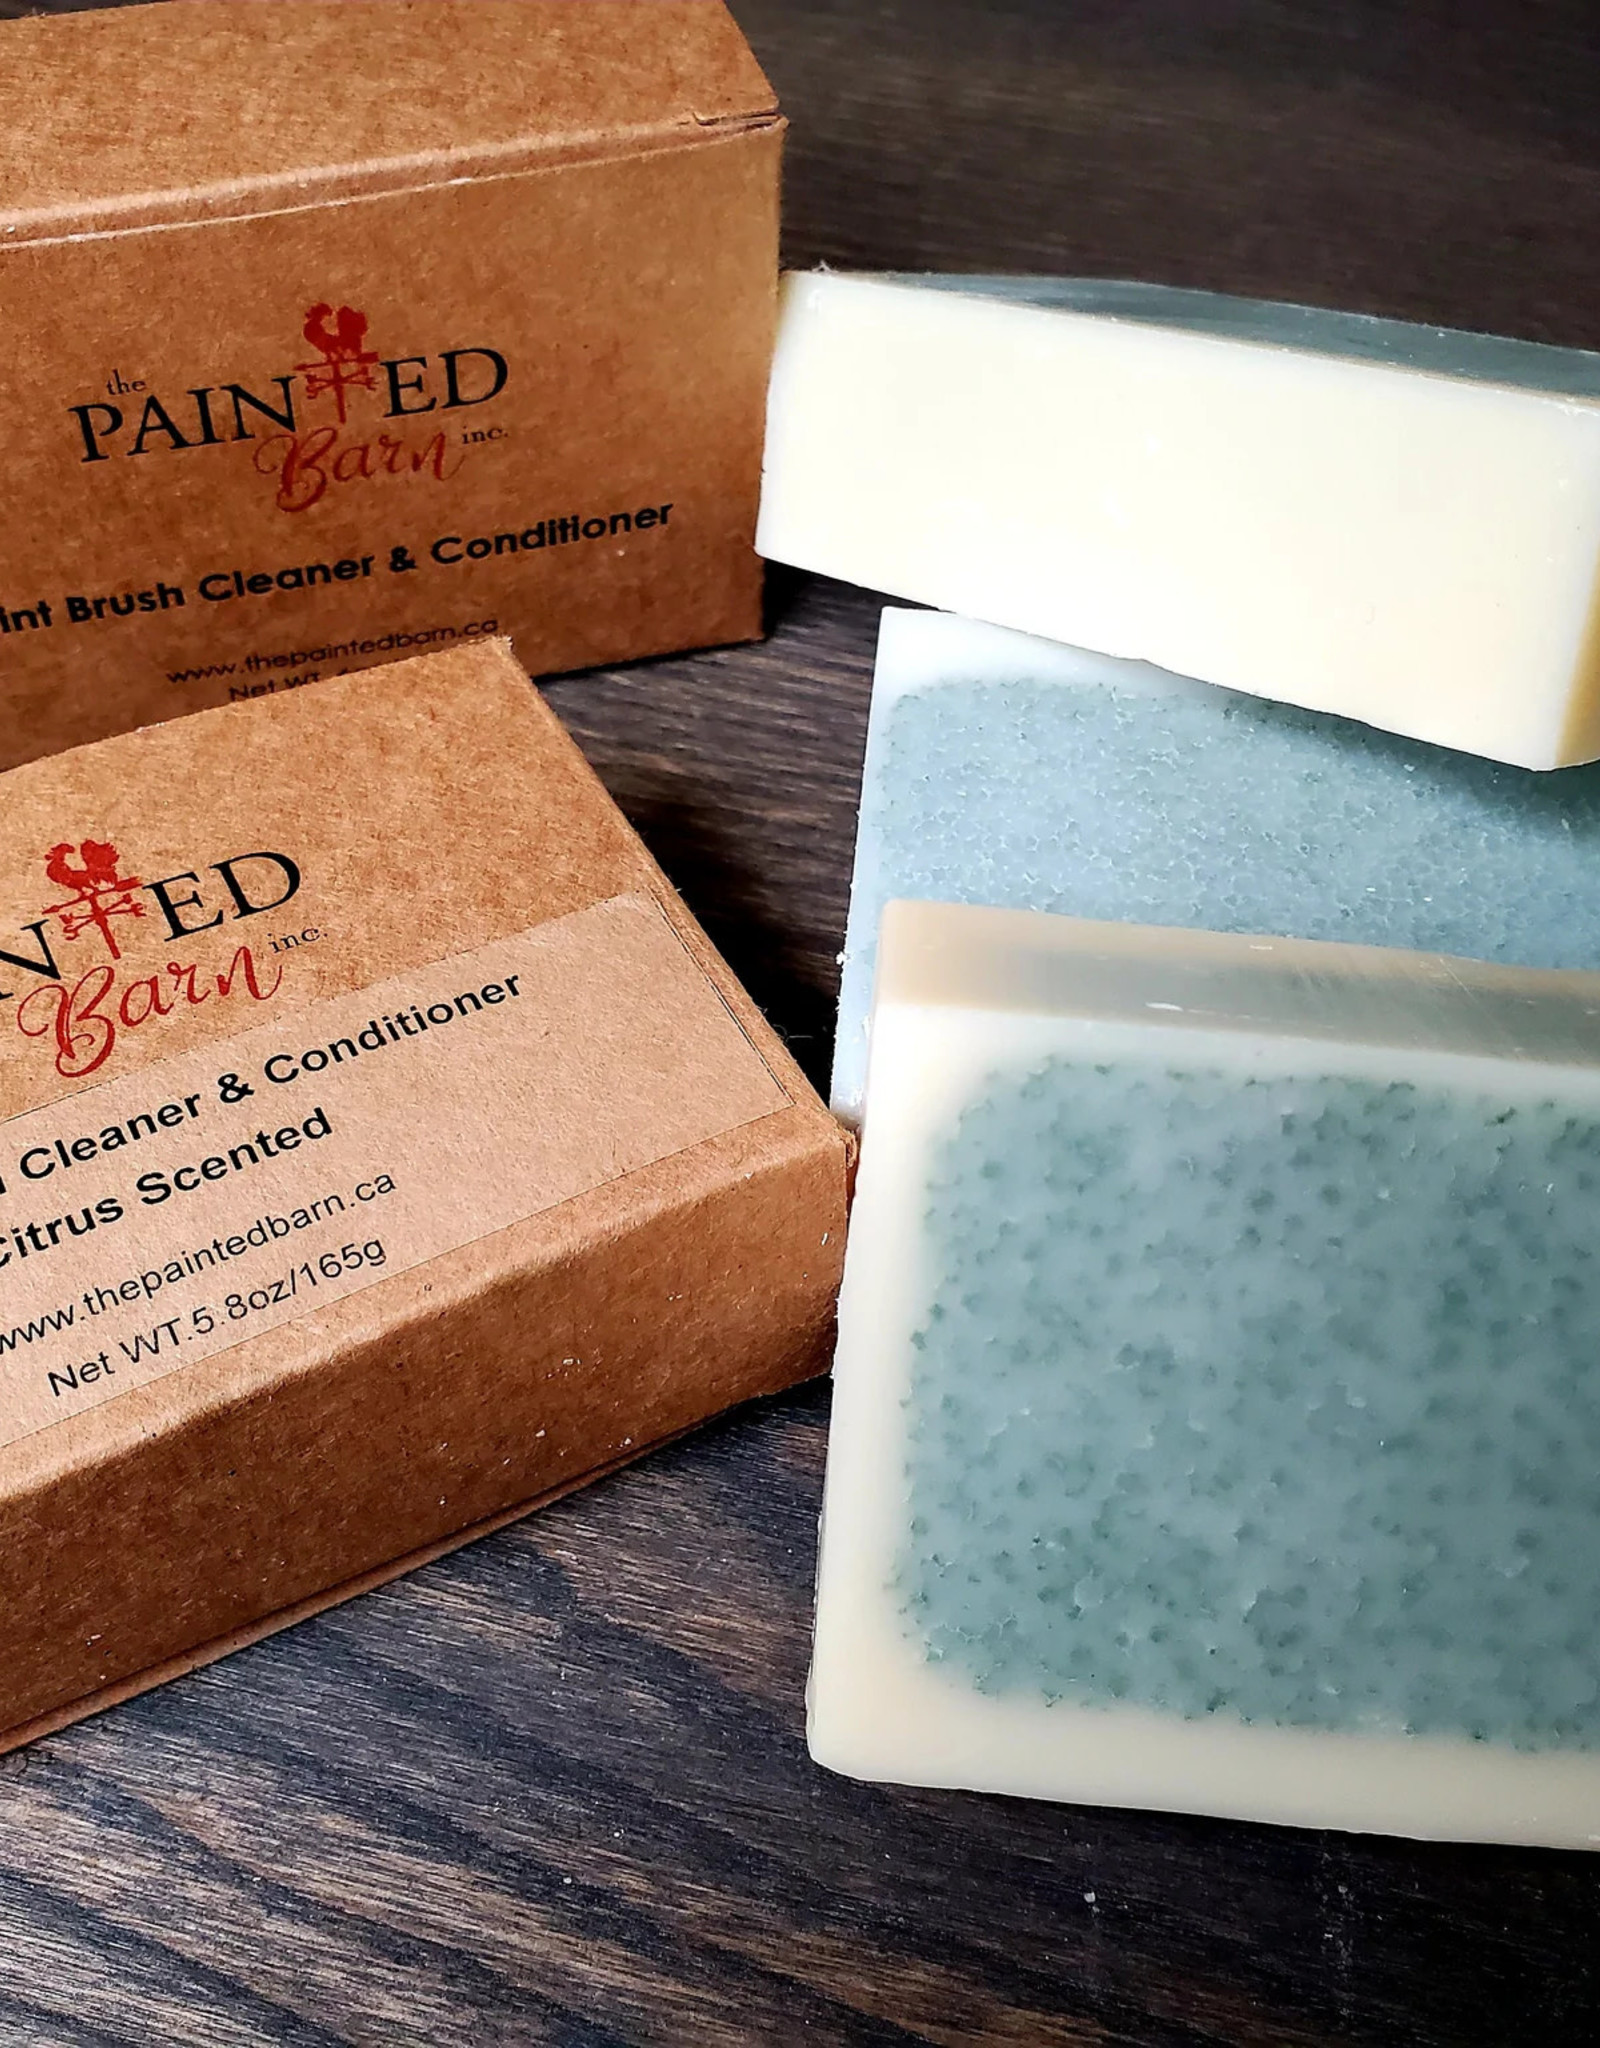 The Painted Barn Brush Cleaner Soap